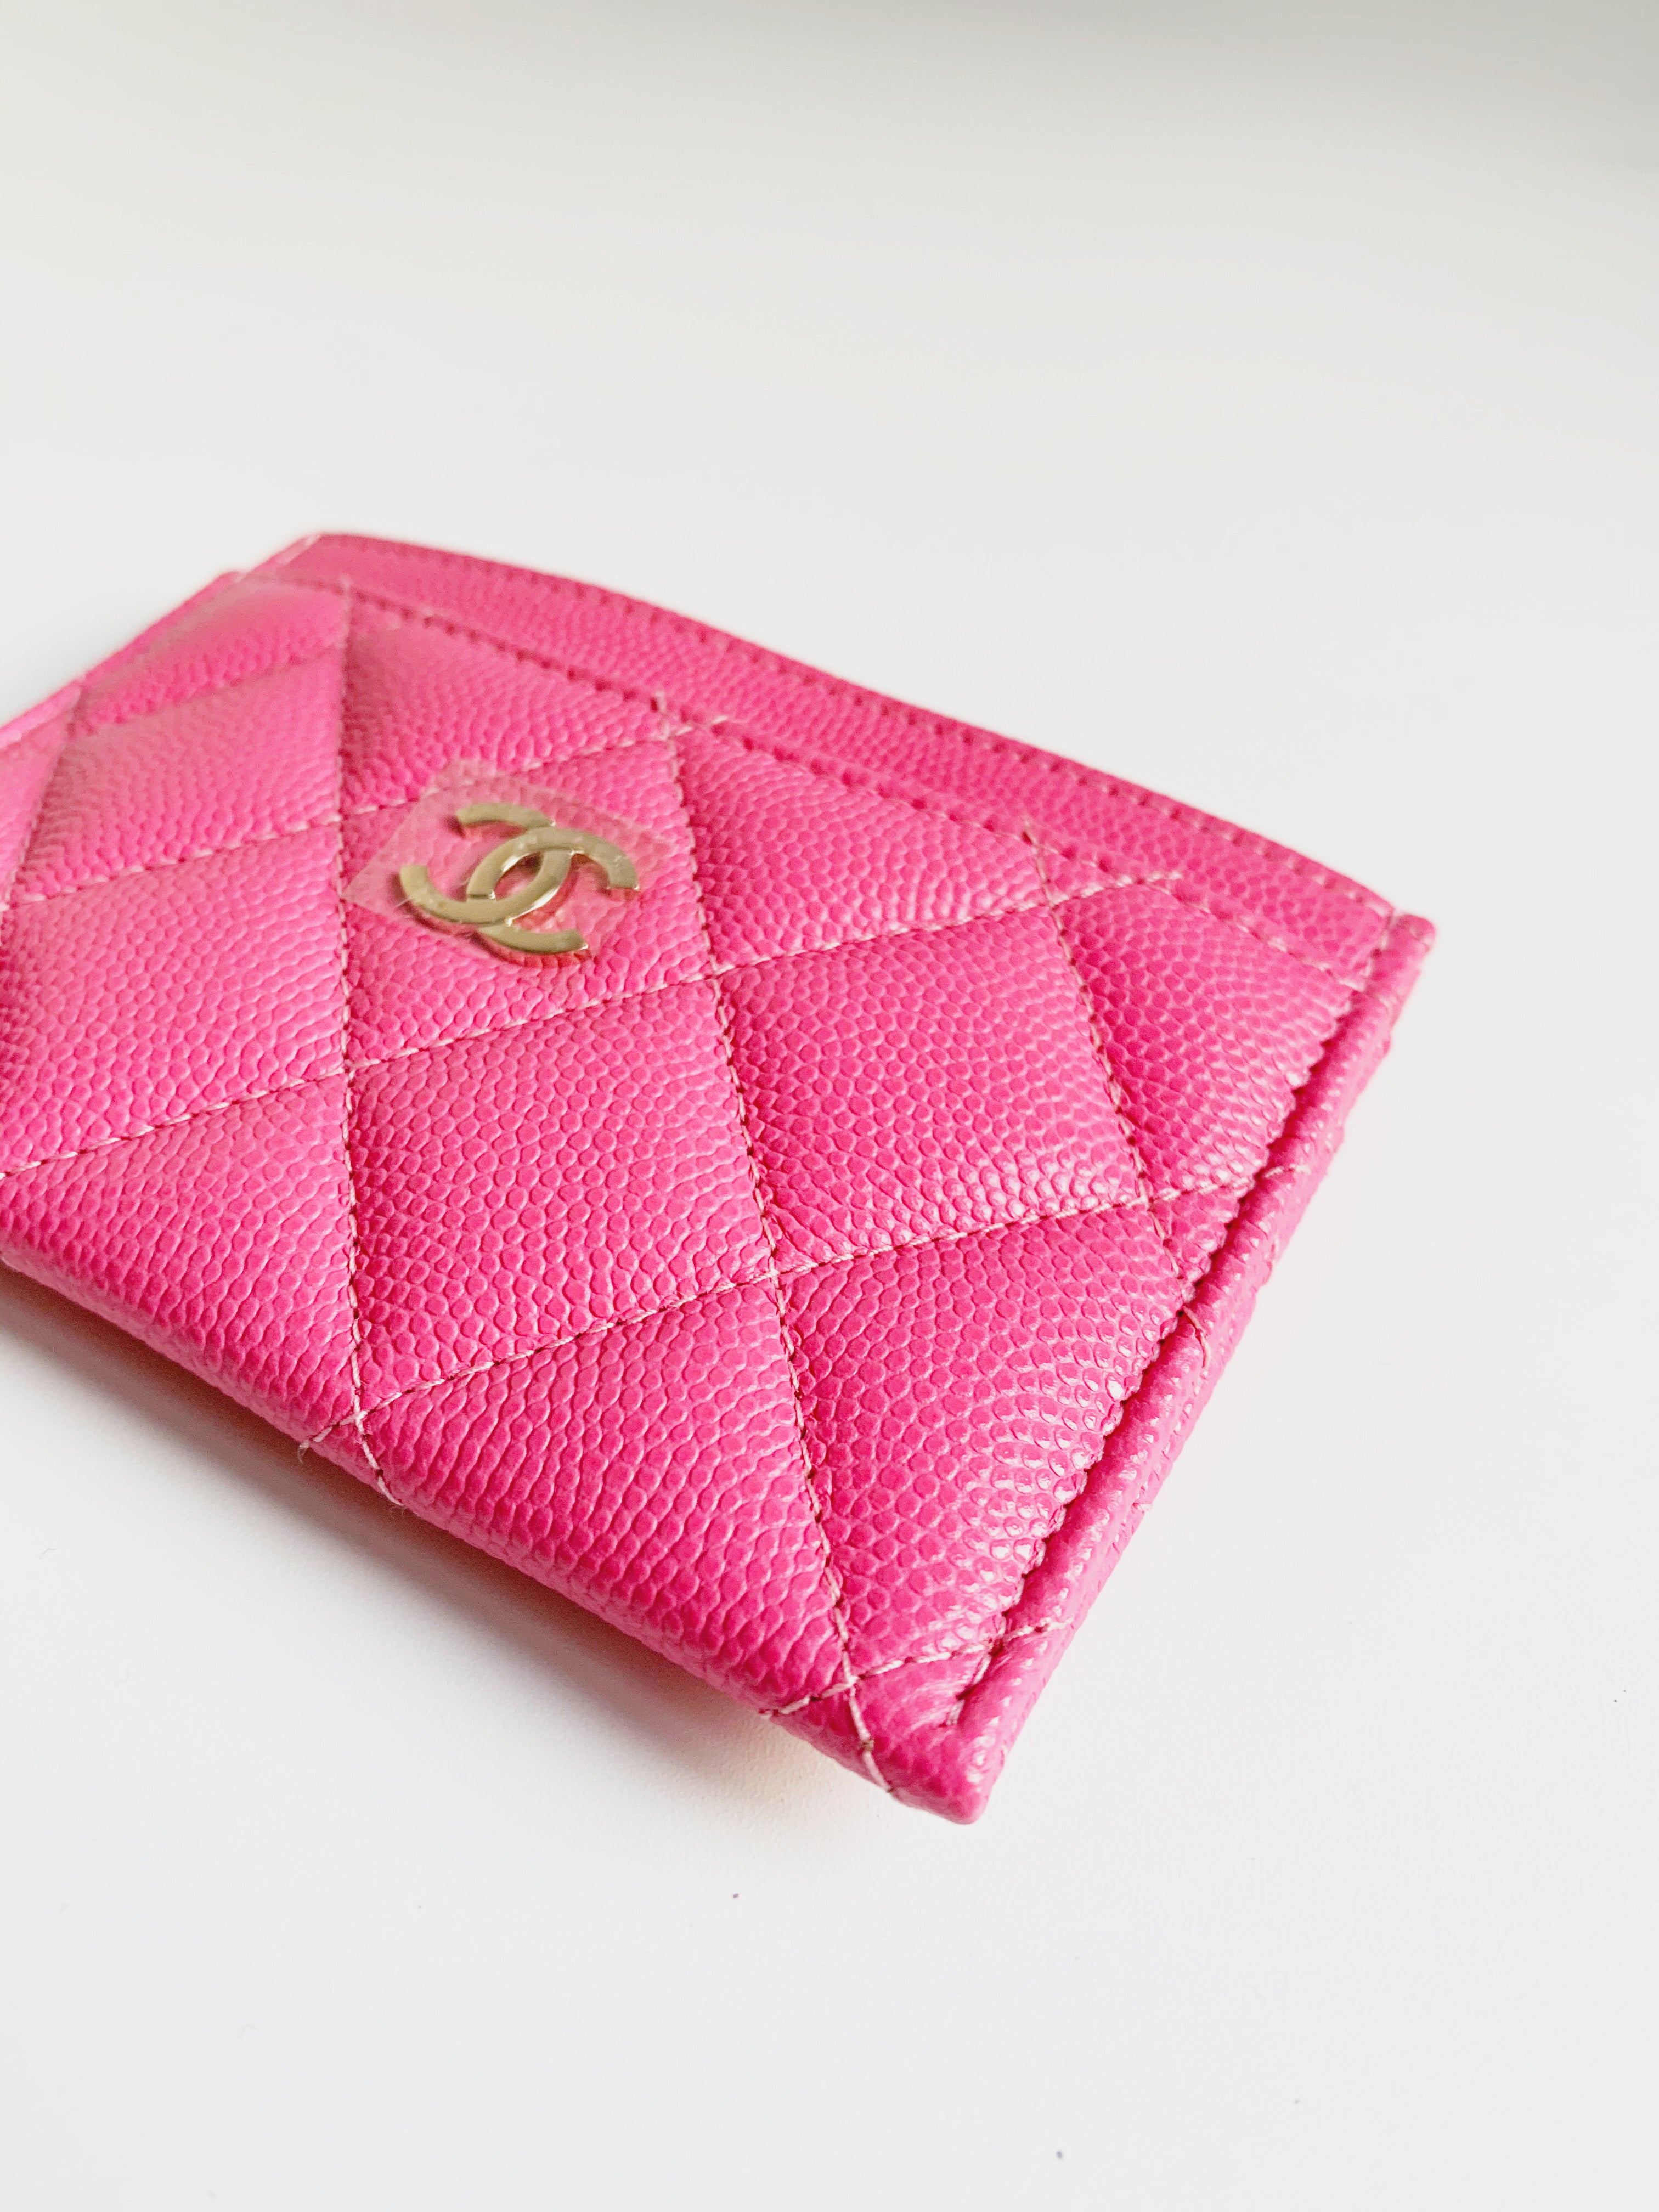 How cute is this little pink card holder?! #chanel #chanelunboxing #ca